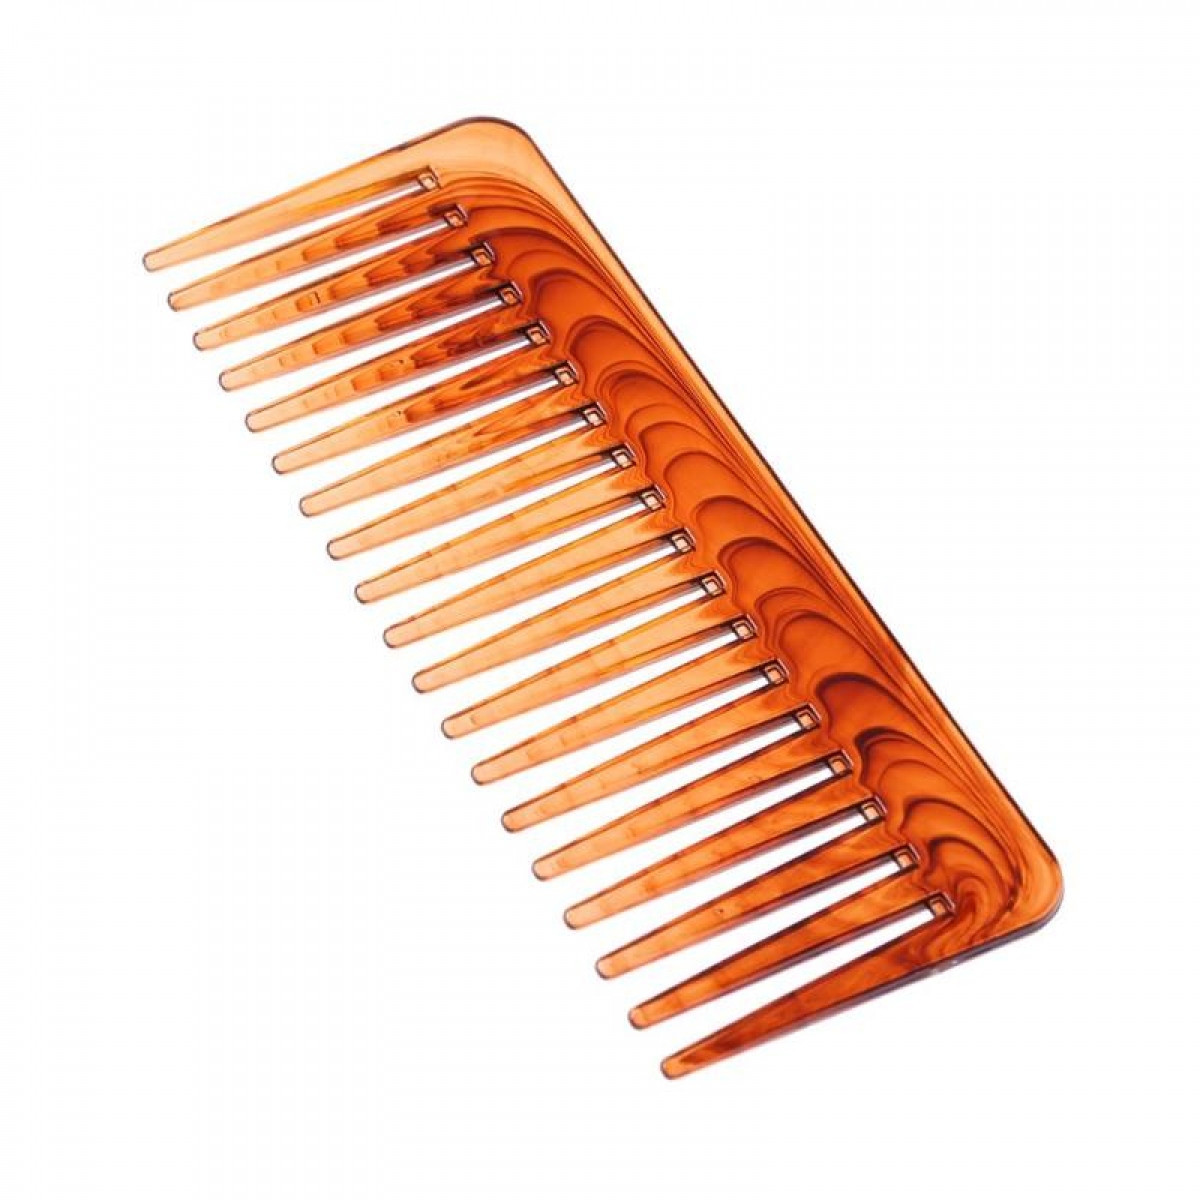 Suitable brush for hair image 4